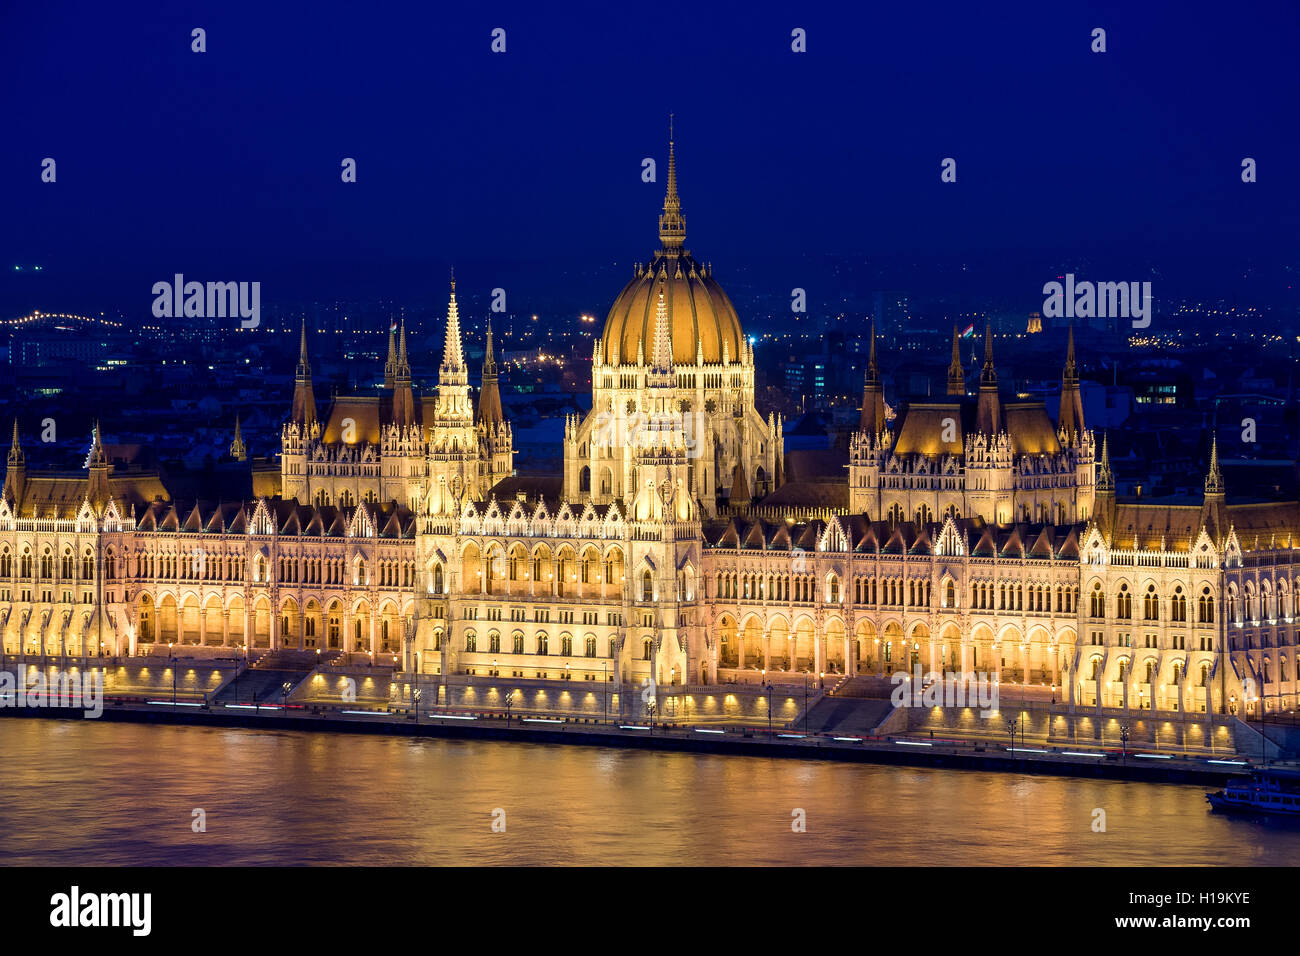 The Hungarian Parliament Building, also known as the Parliament of Budapest.One of Europe's oldest legislative buildings, a nota Stock Photo